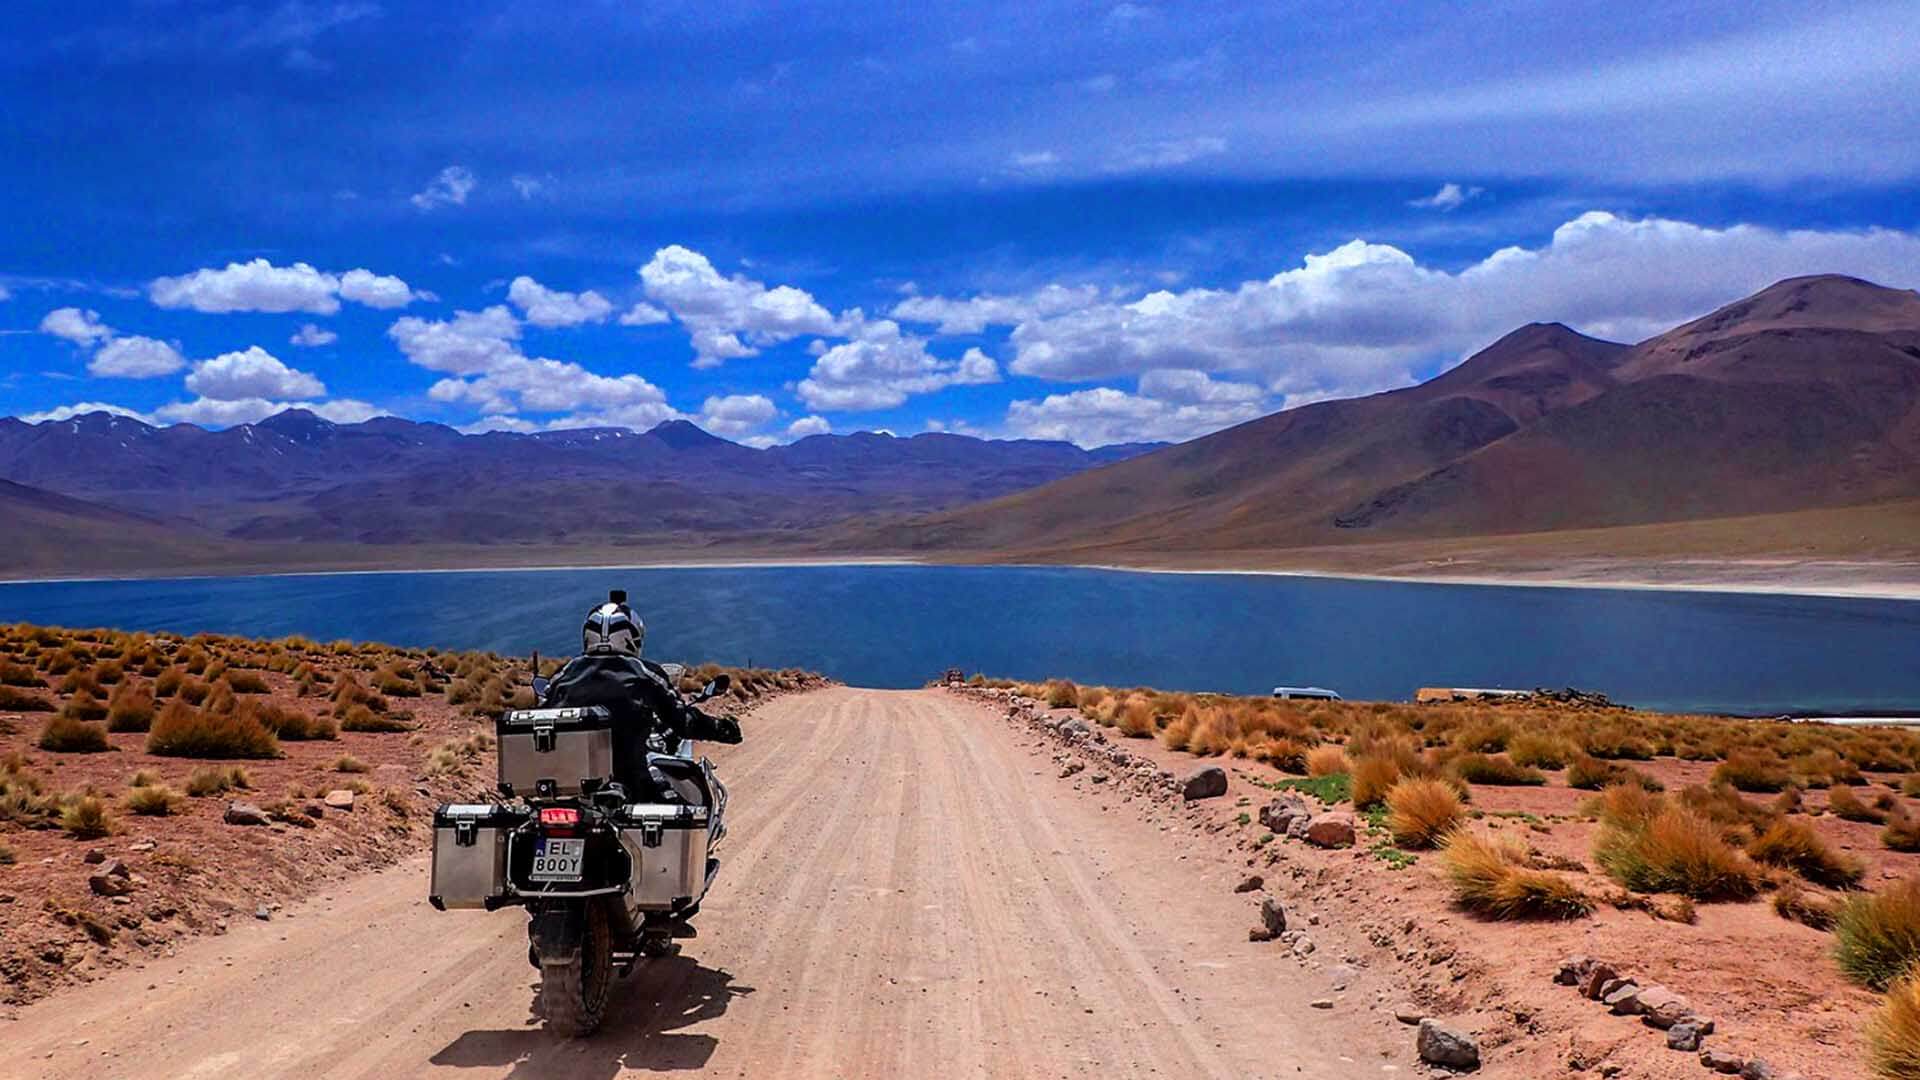 motorcycle tours in South America by MotoBirds